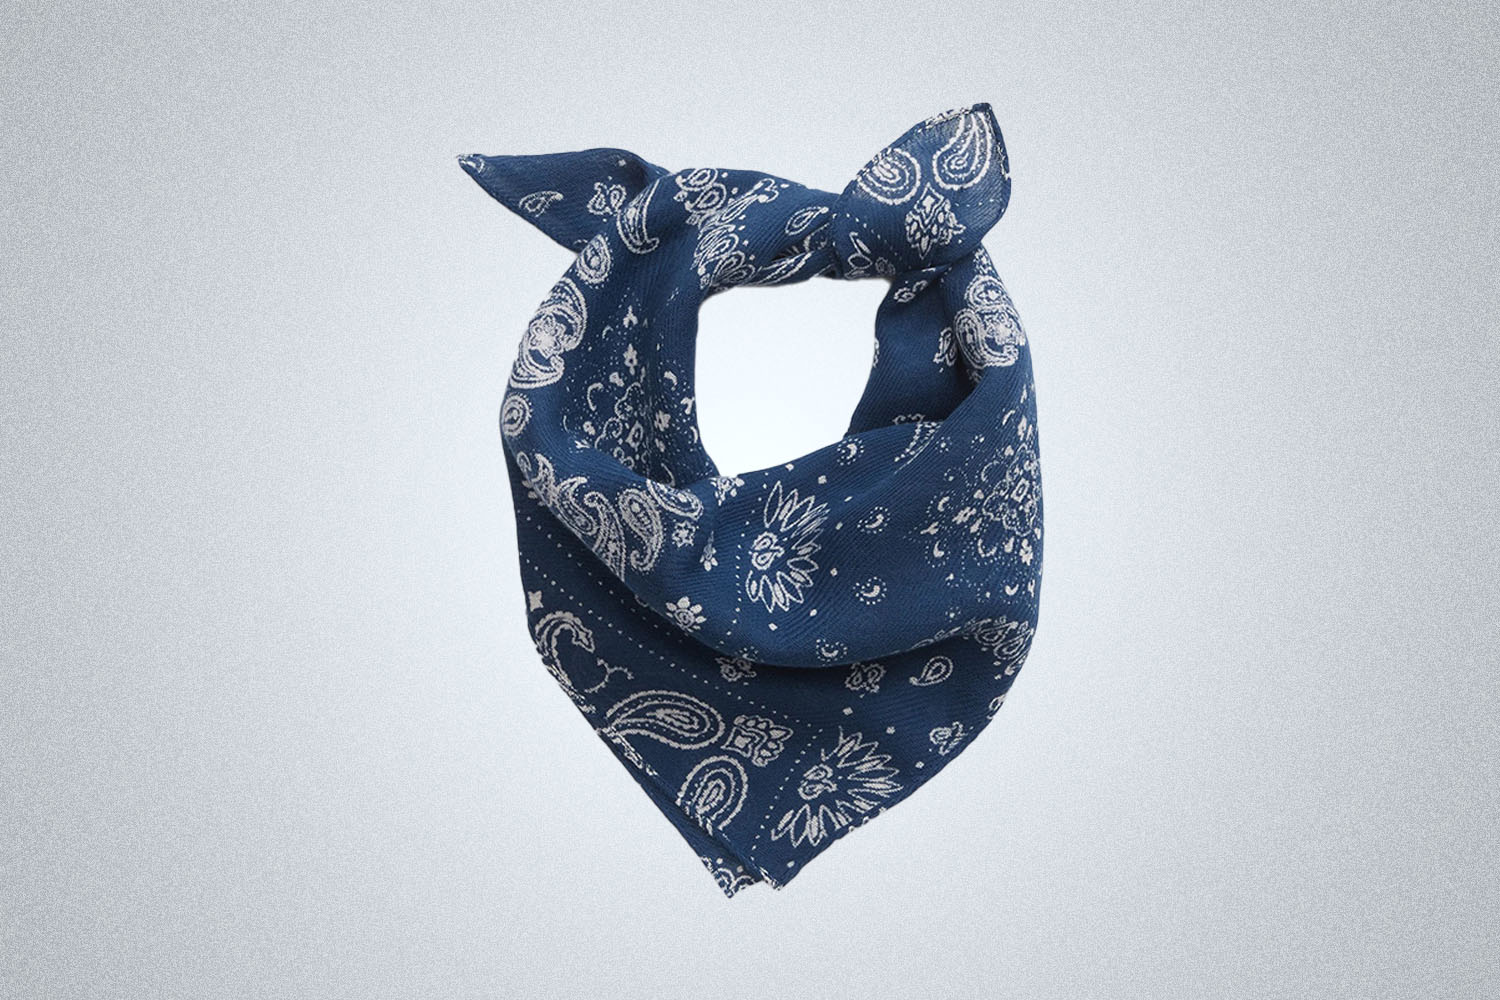 a tie-dyed bandana from Gap on a grey background